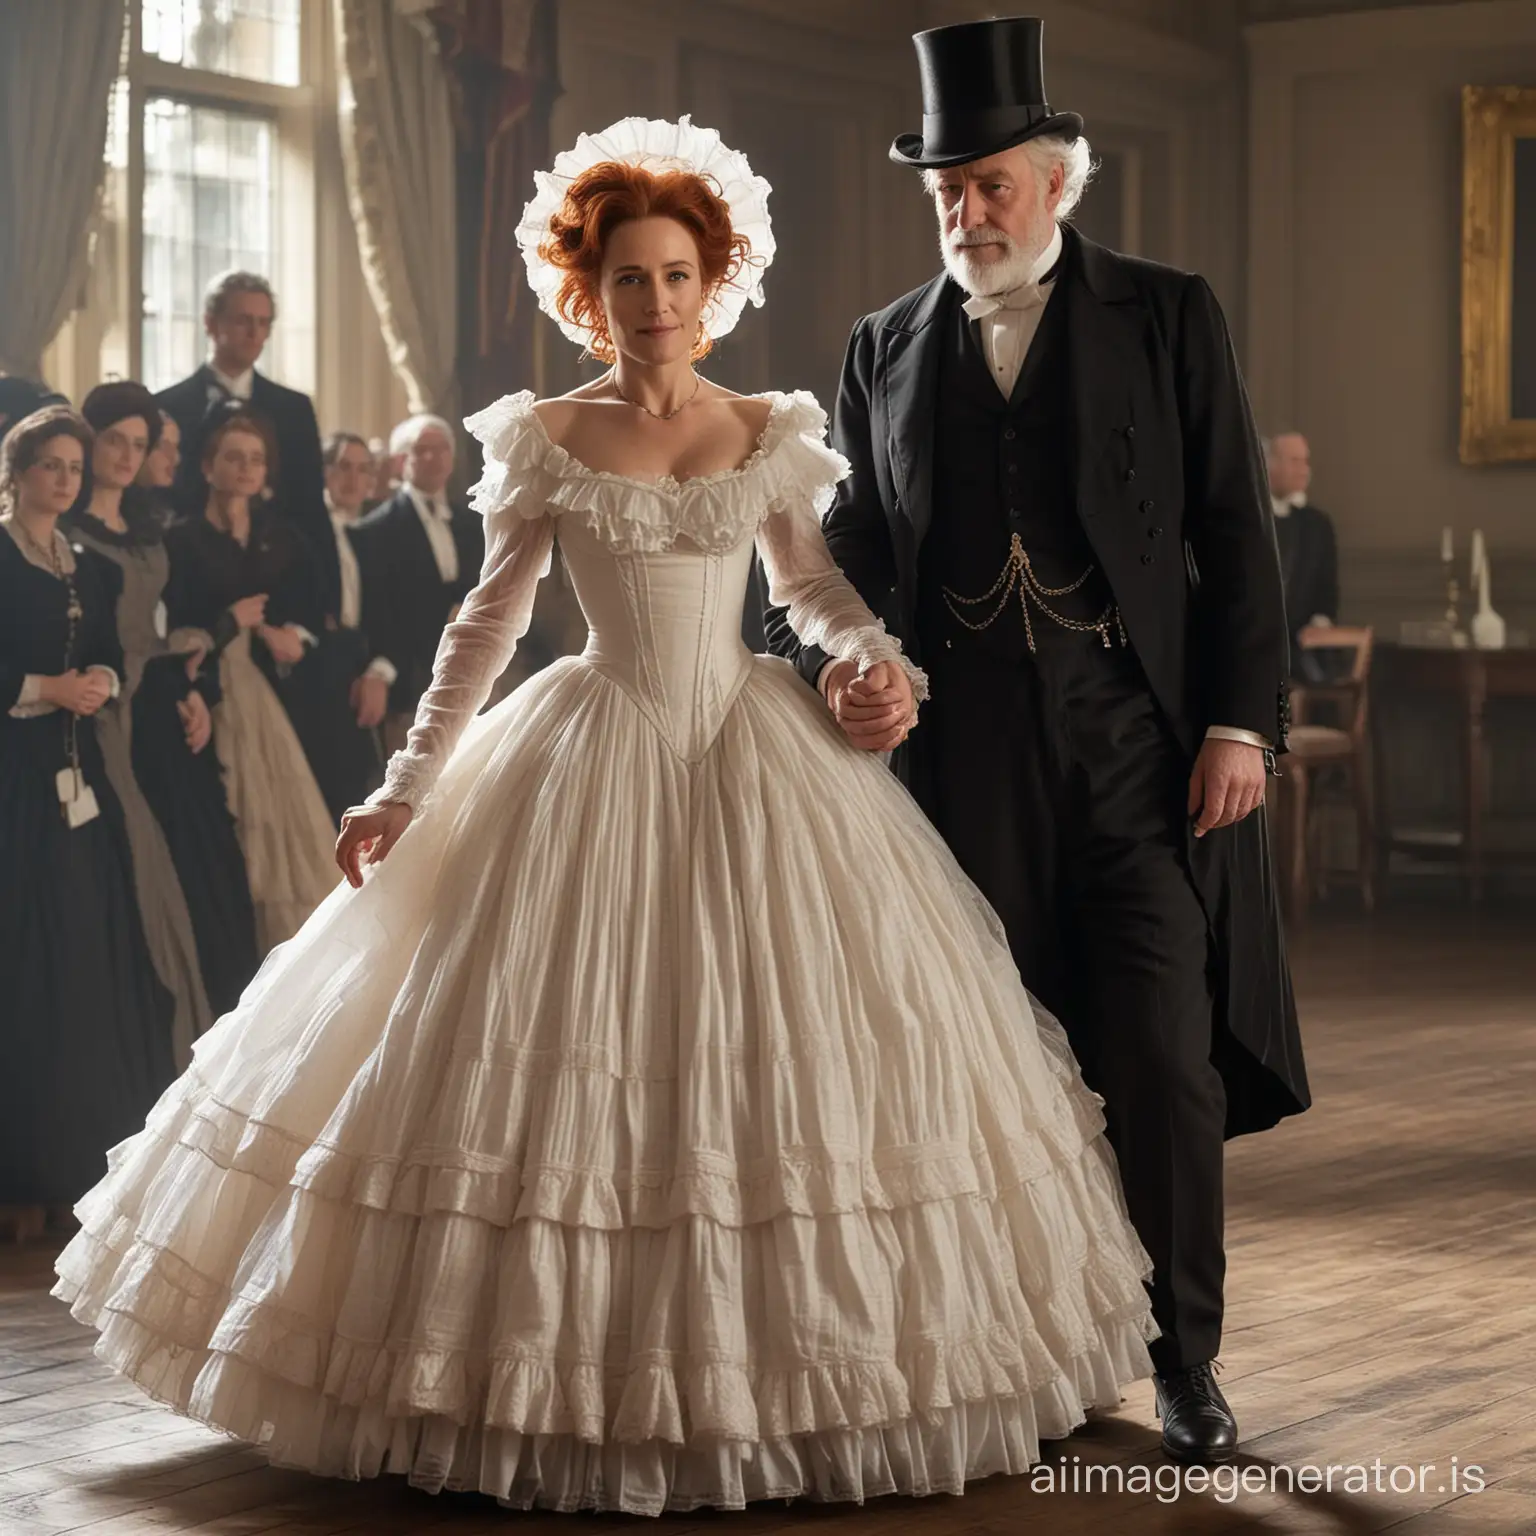 red haired Gillian Anderson wearing a long dark brown floor-length loose billowing 1860 Victorian crinoline poofy dress with a frilly bonnet dancing with an old man dressed in a black Victorian suit who seems to be her new husband